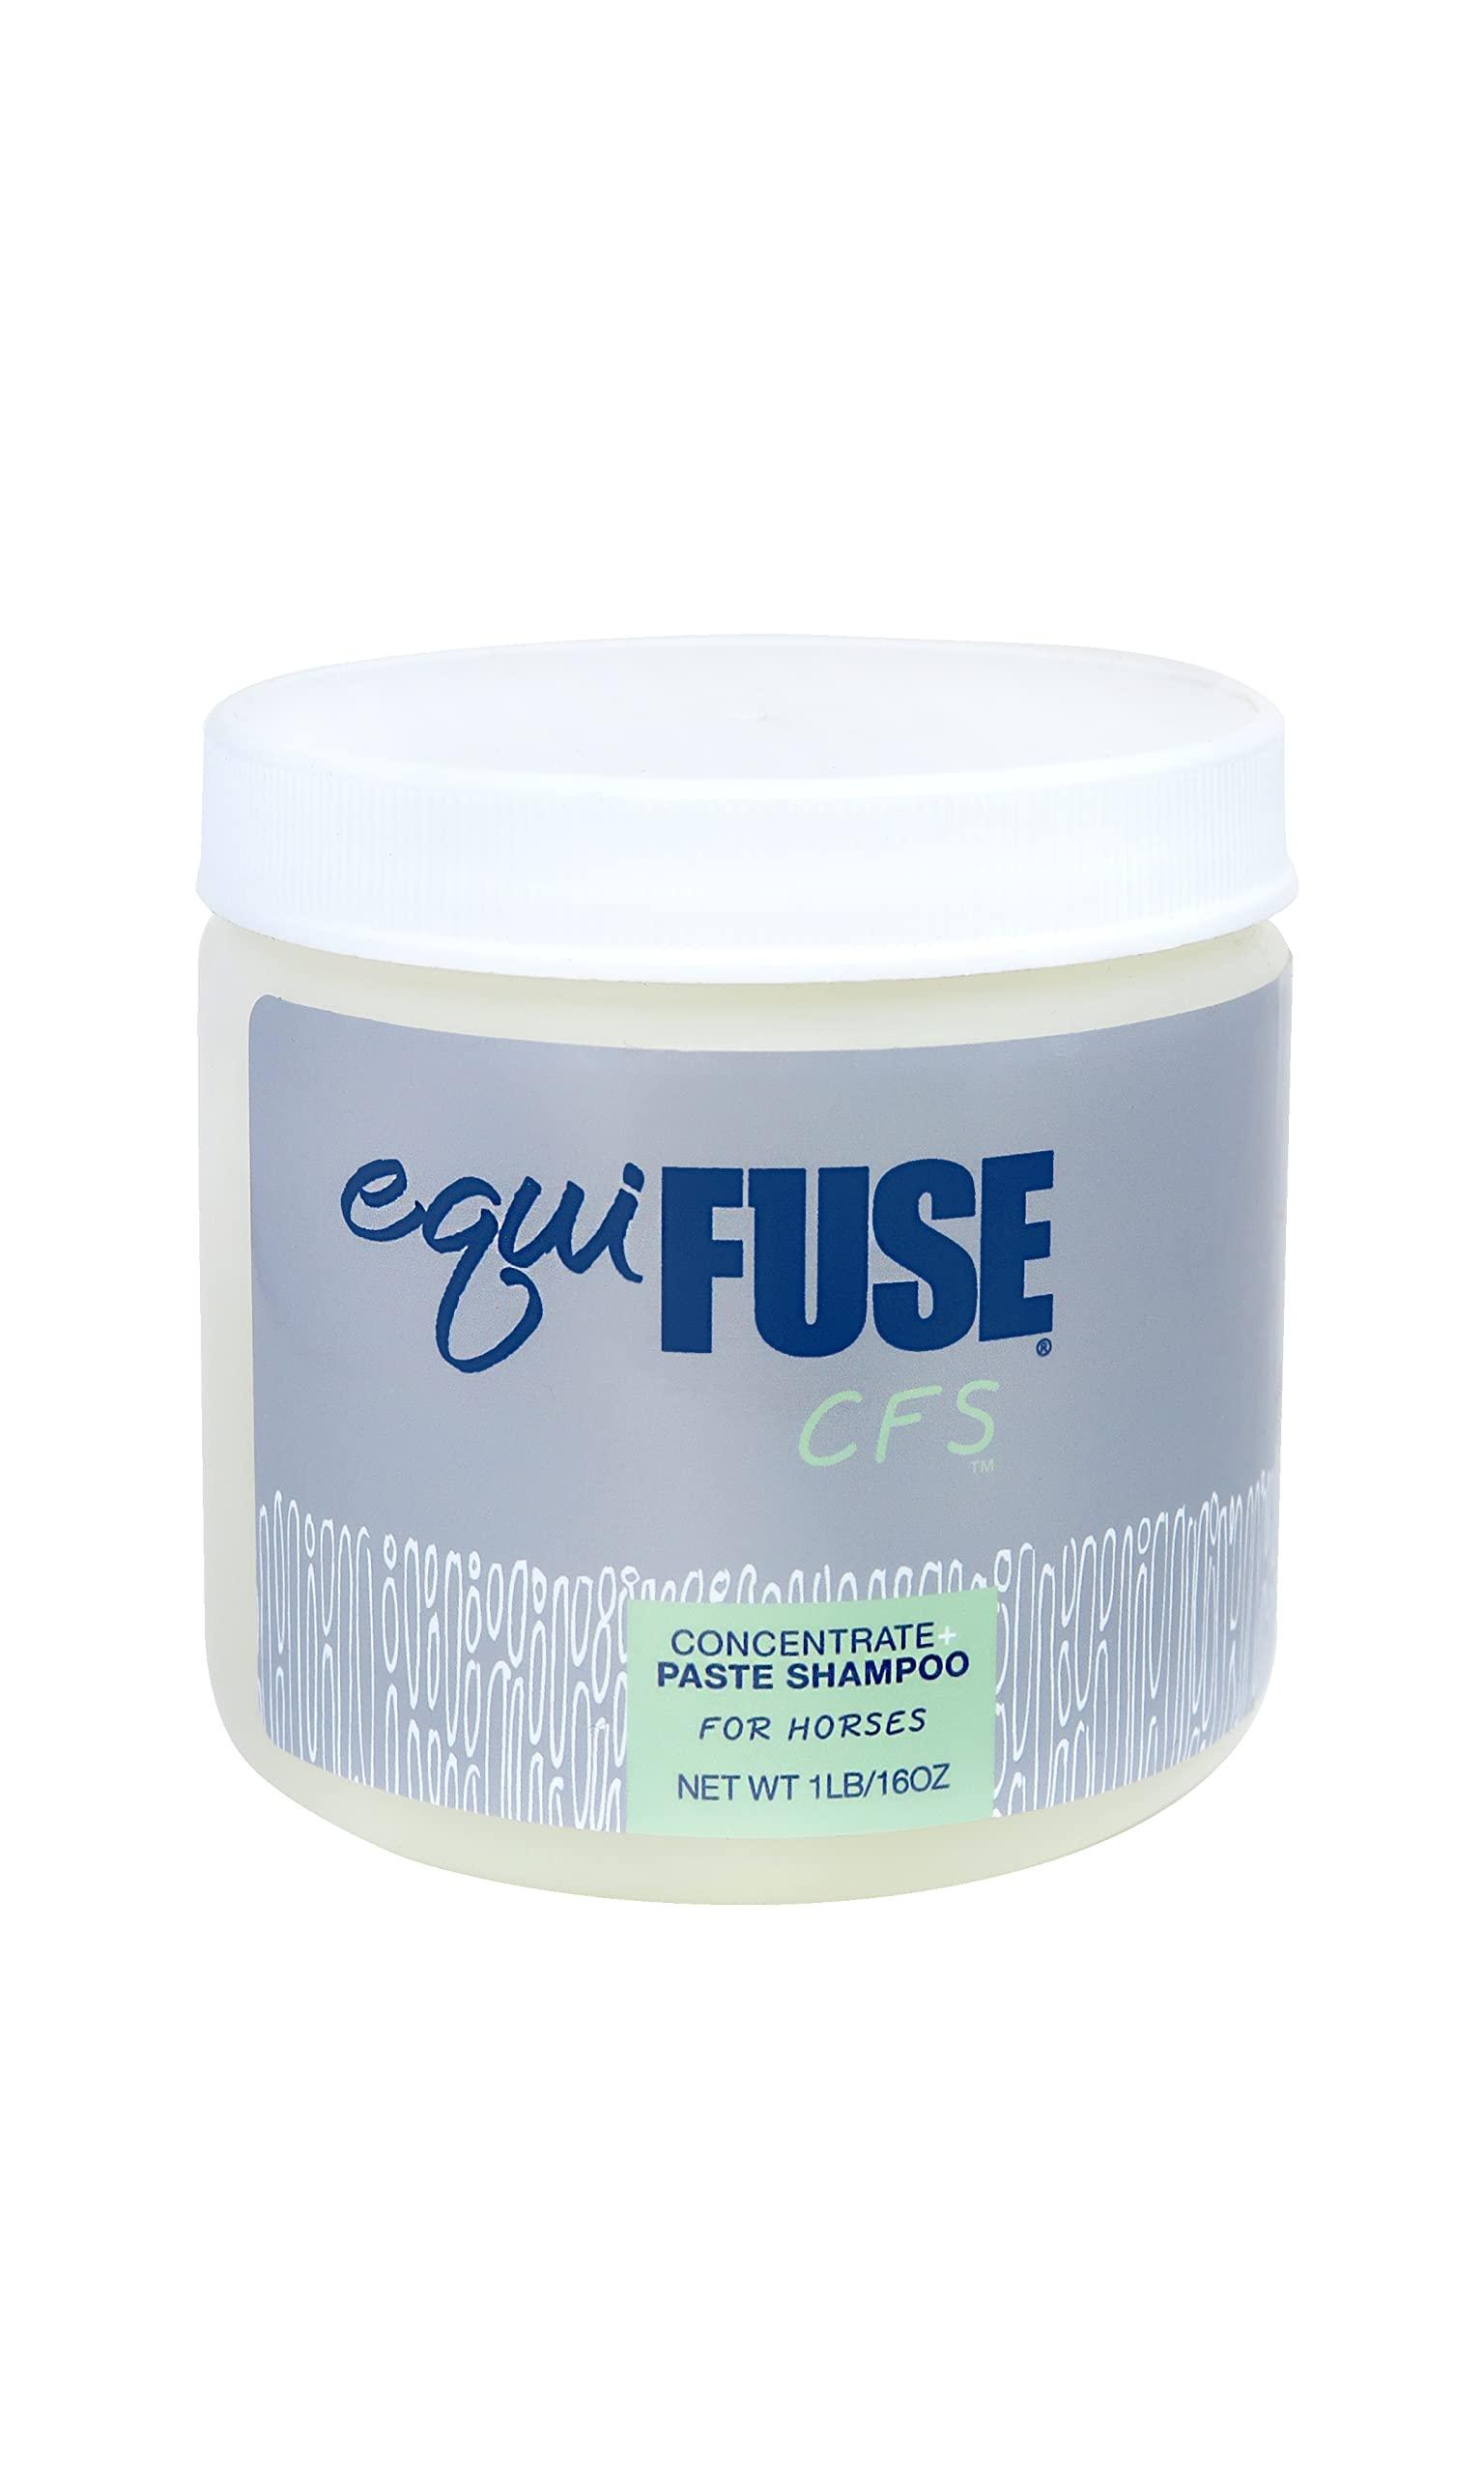 EquiFUSE CFS Concentrate + Paste Horse Shampoo | Formulated for Deep Cleansing and Superior Shine on Hair |100% all-natural Coat Brightener | 16 oz